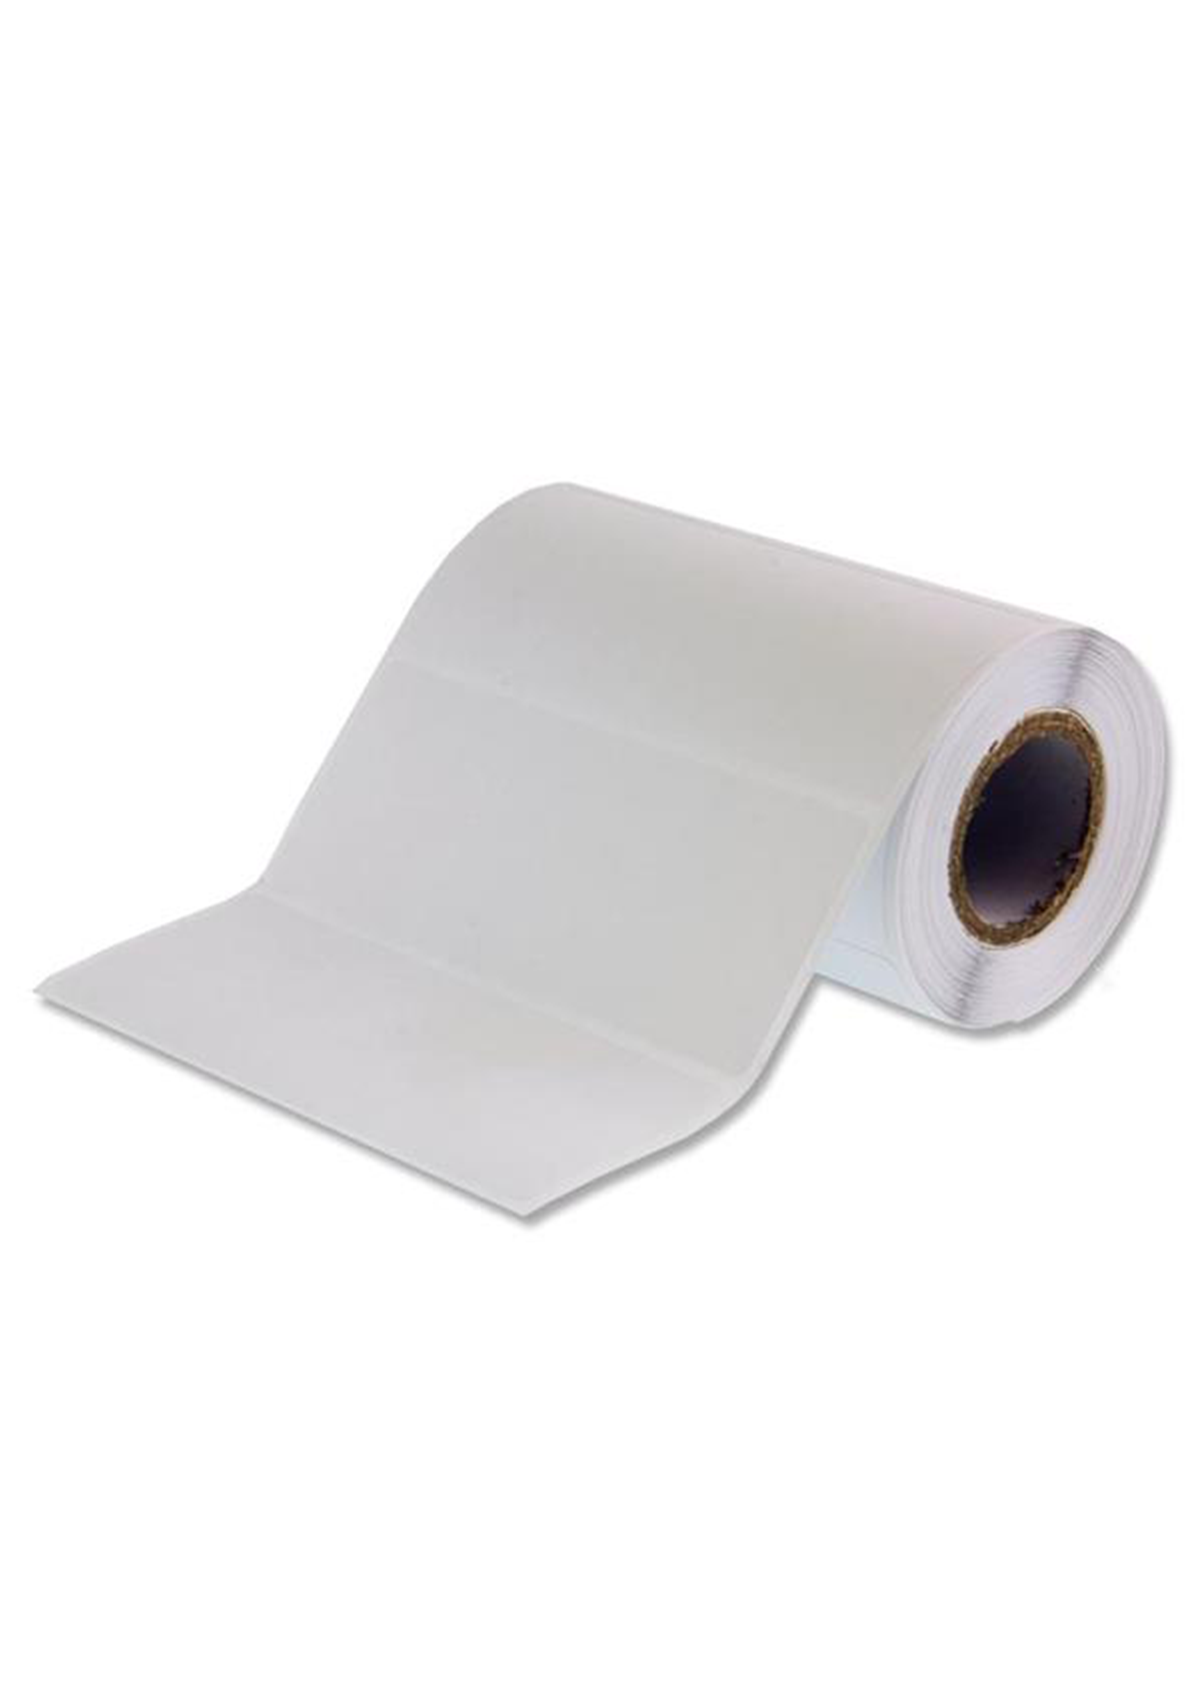 Roll 200 Self Adhesive White Address Labels